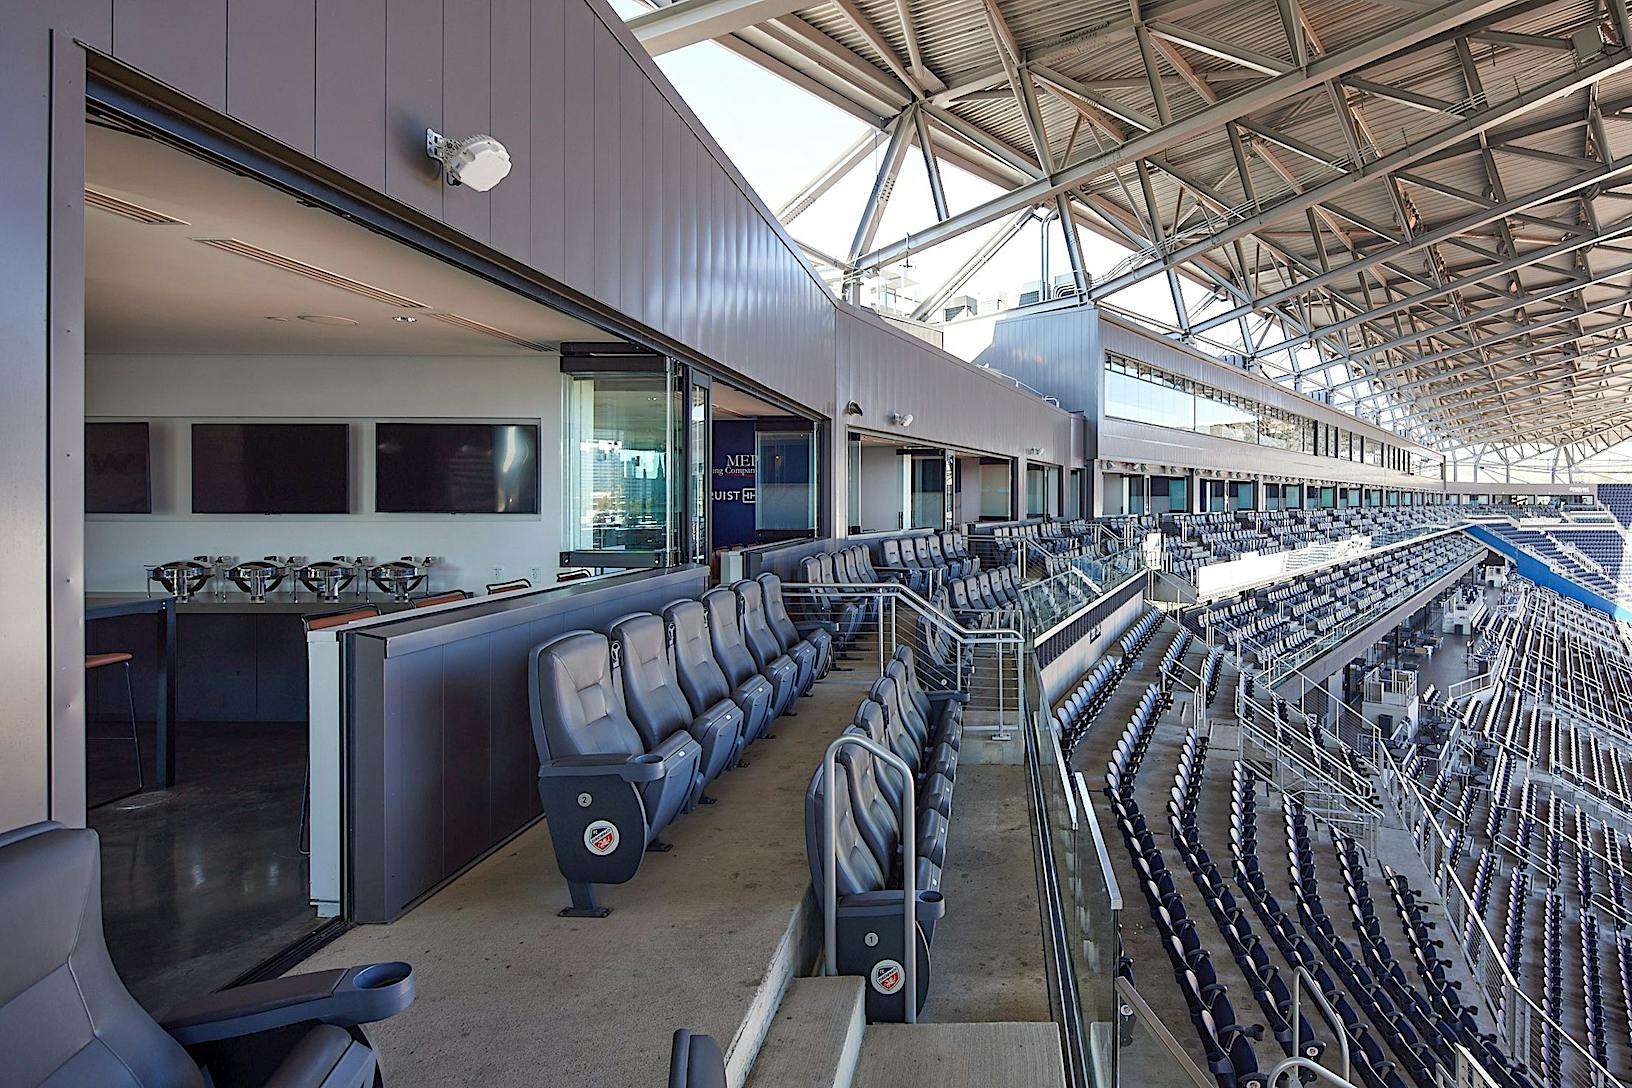 The inside of the TQL stadium with rows of seats - frameless glass panels